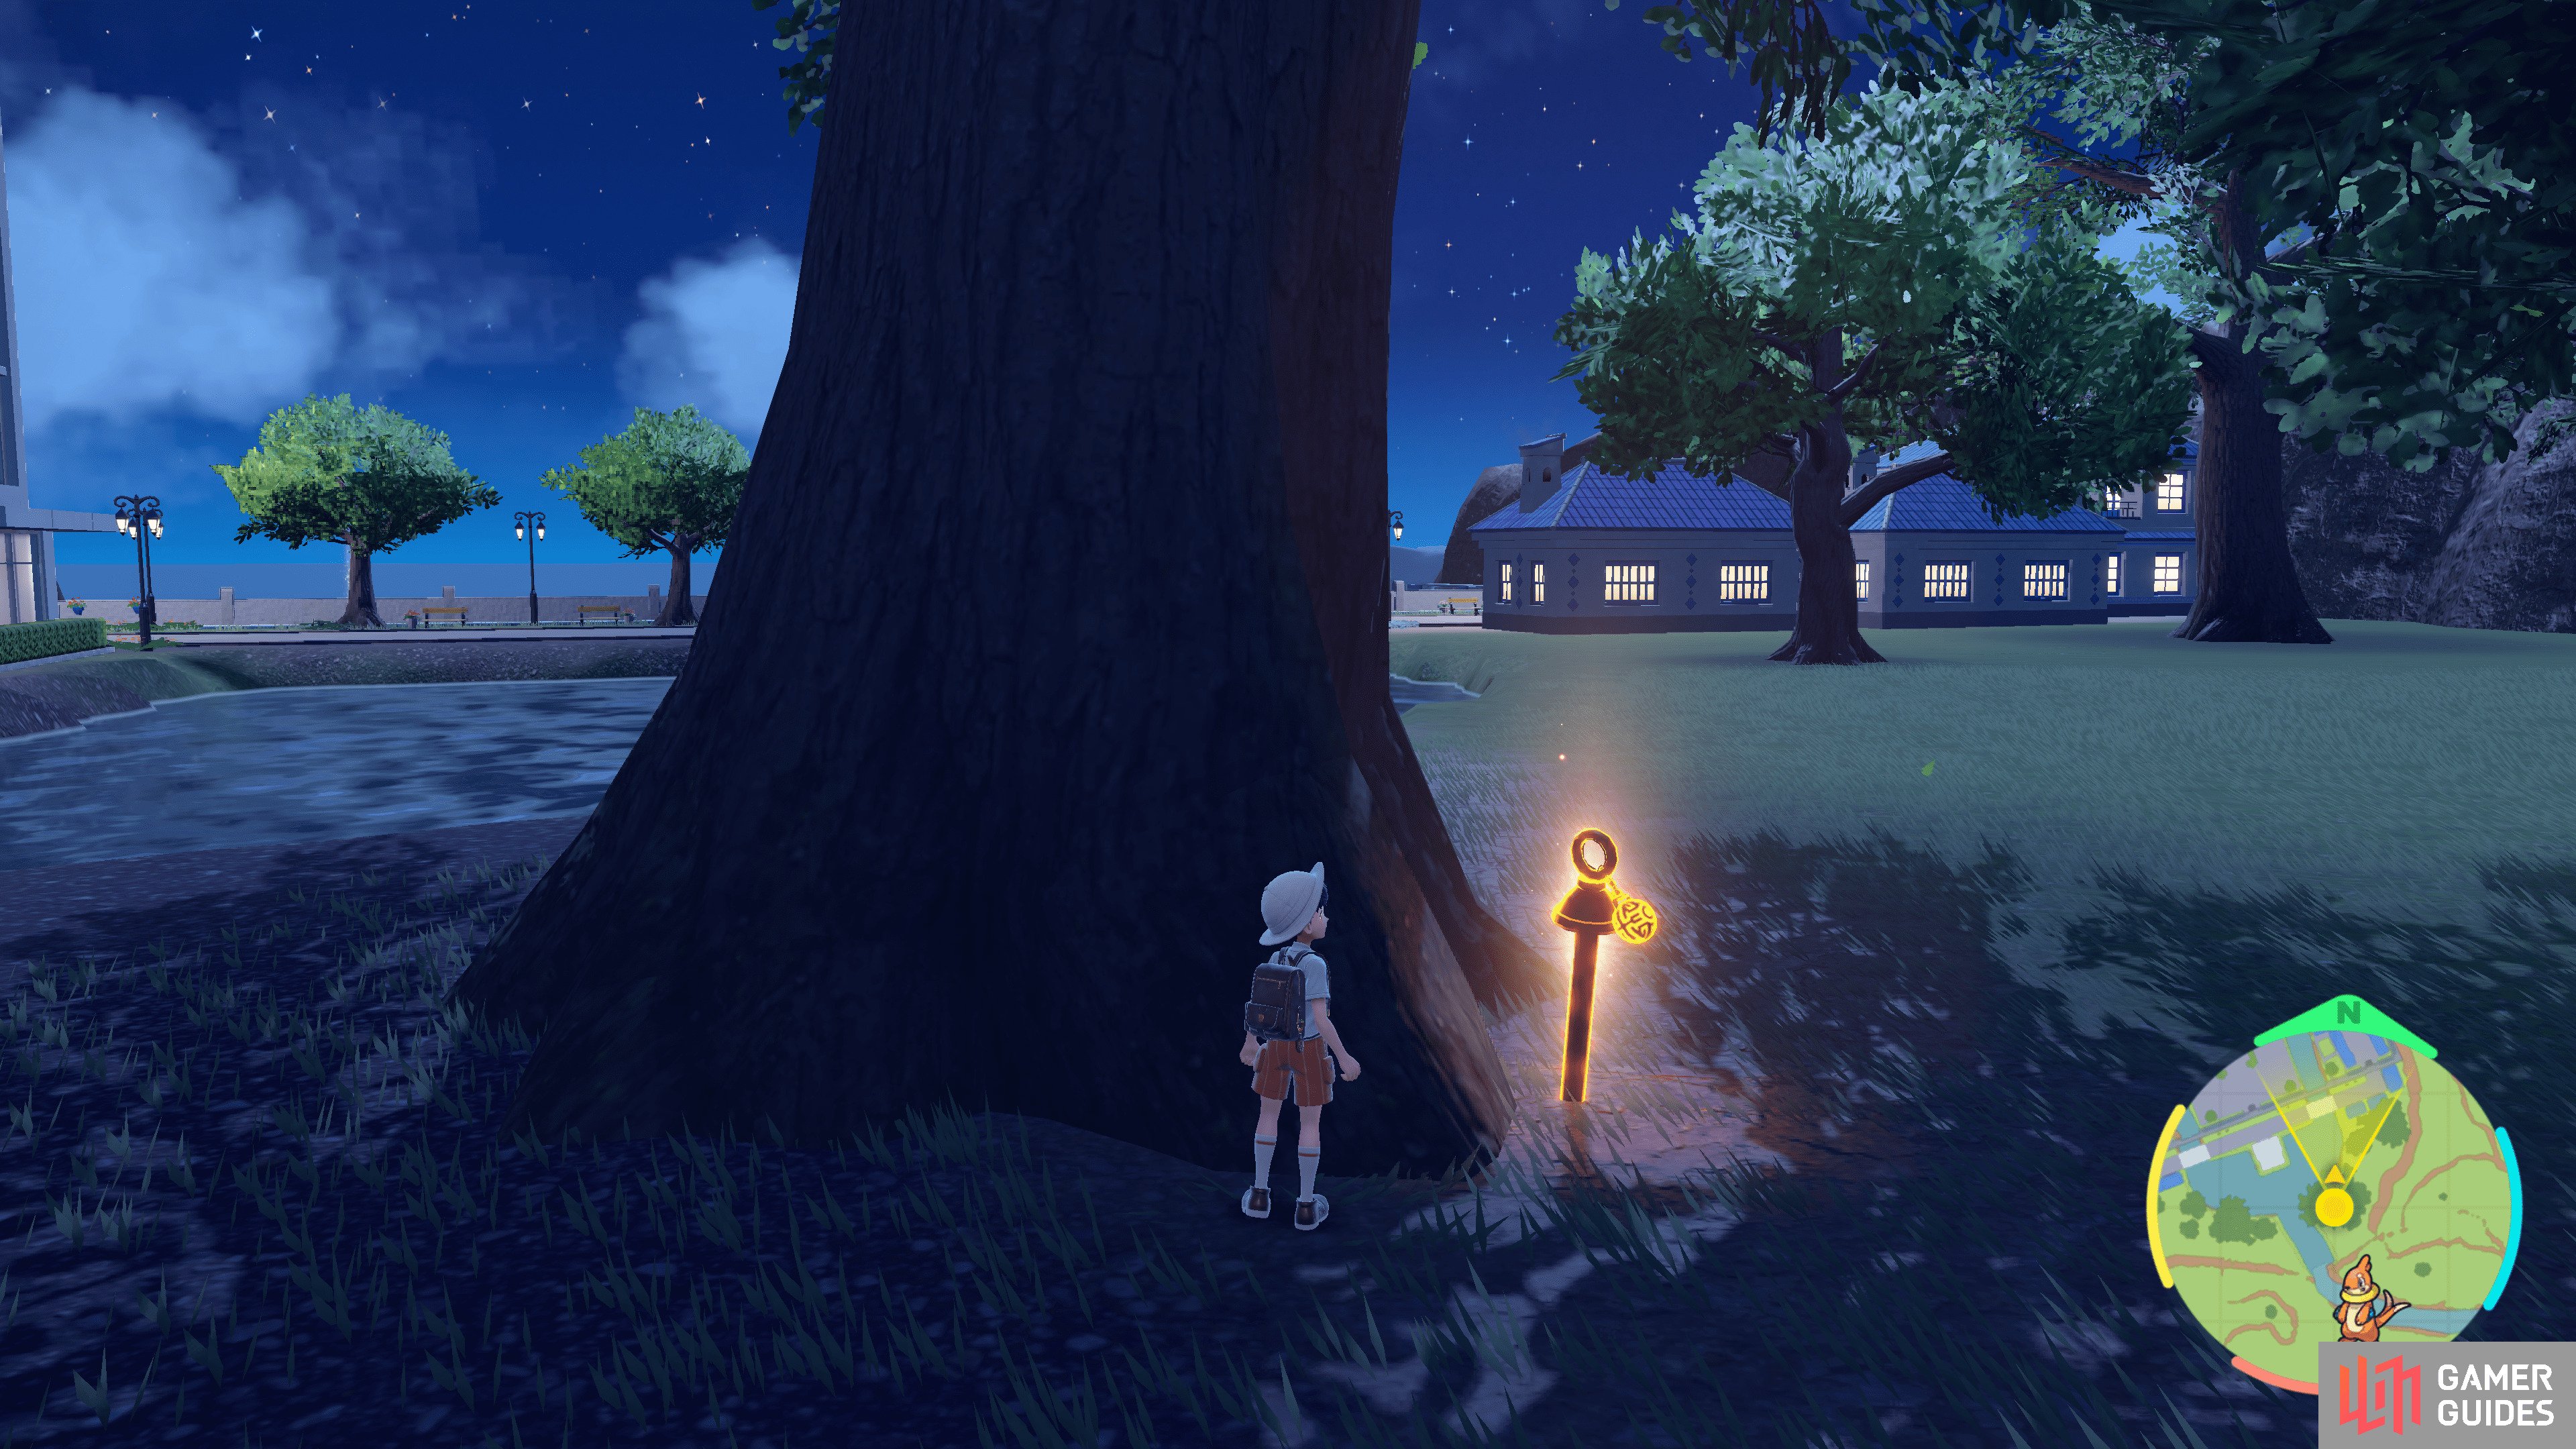 the final orange stake can be found south of the town by a tree.